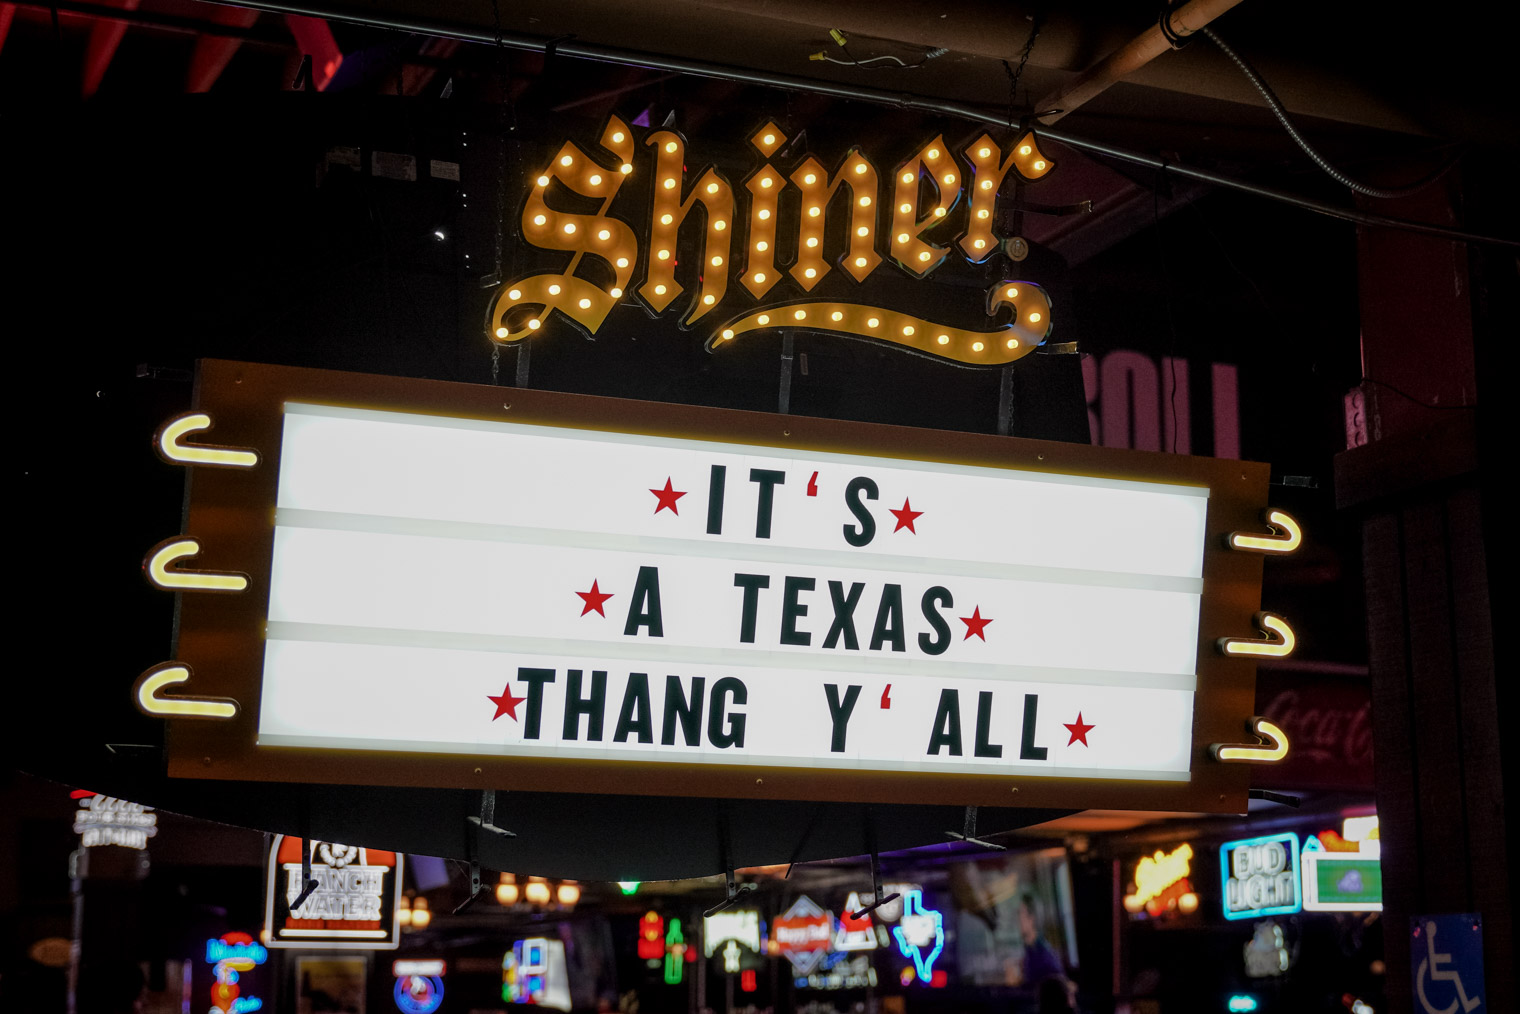 A marquee that saids "It's a Texas thang y'all"